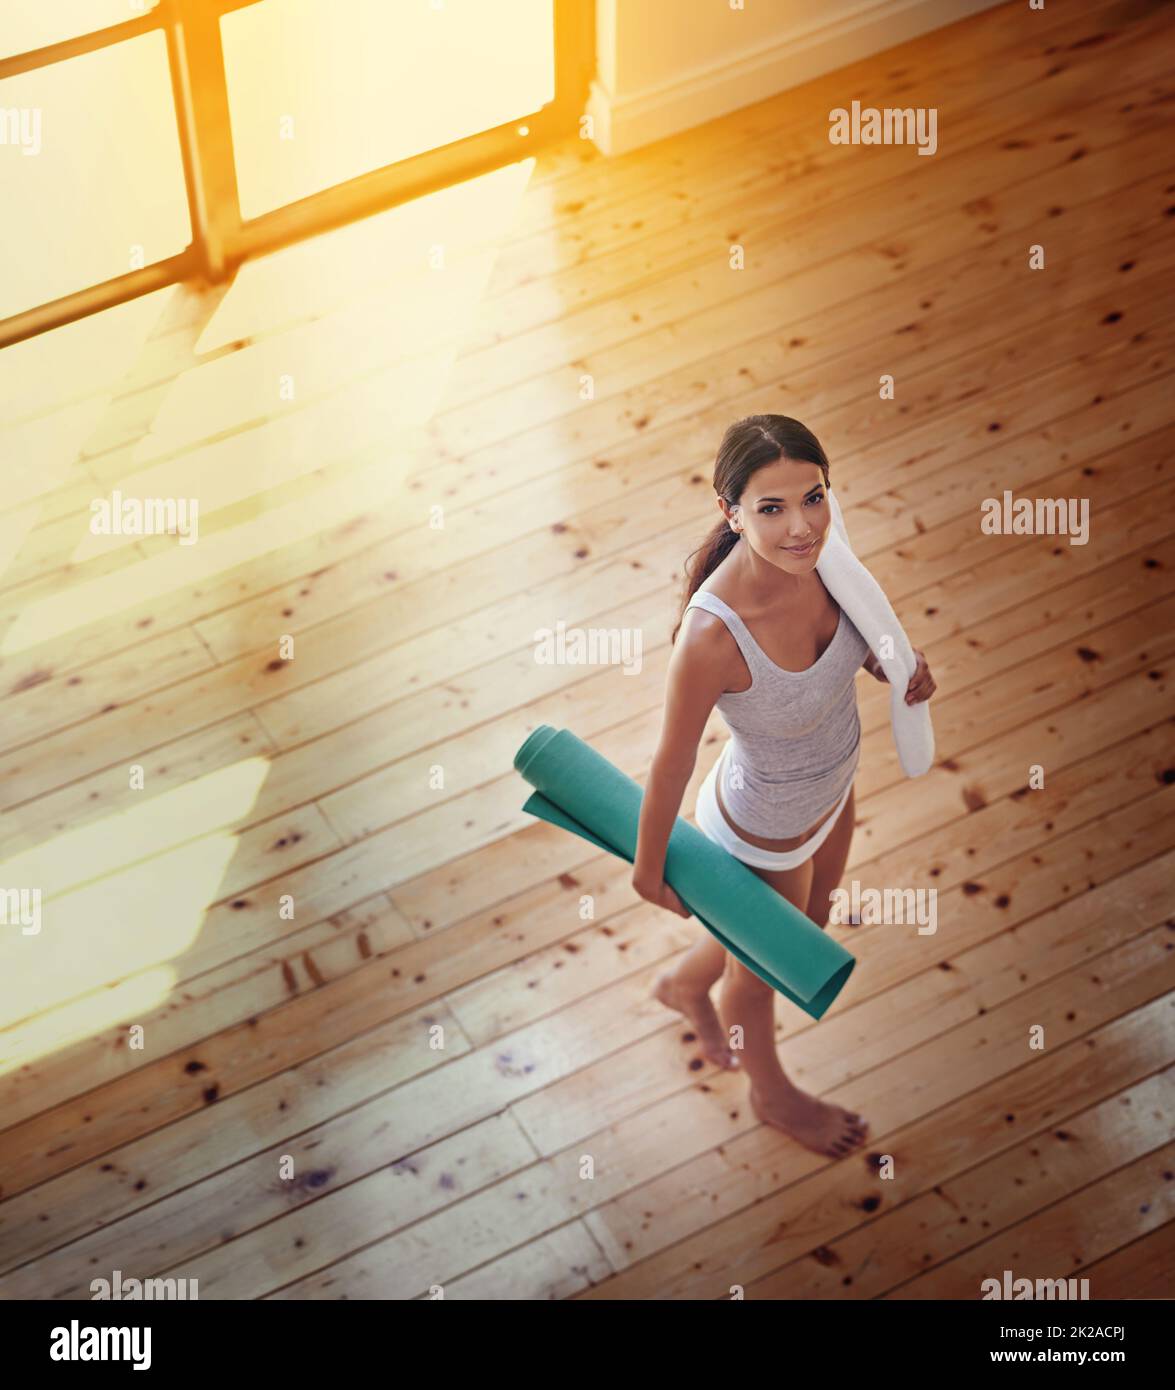 Ready for a session of yoga. High angle portrait of a young woman ready to do yoga at home. Stock Photo